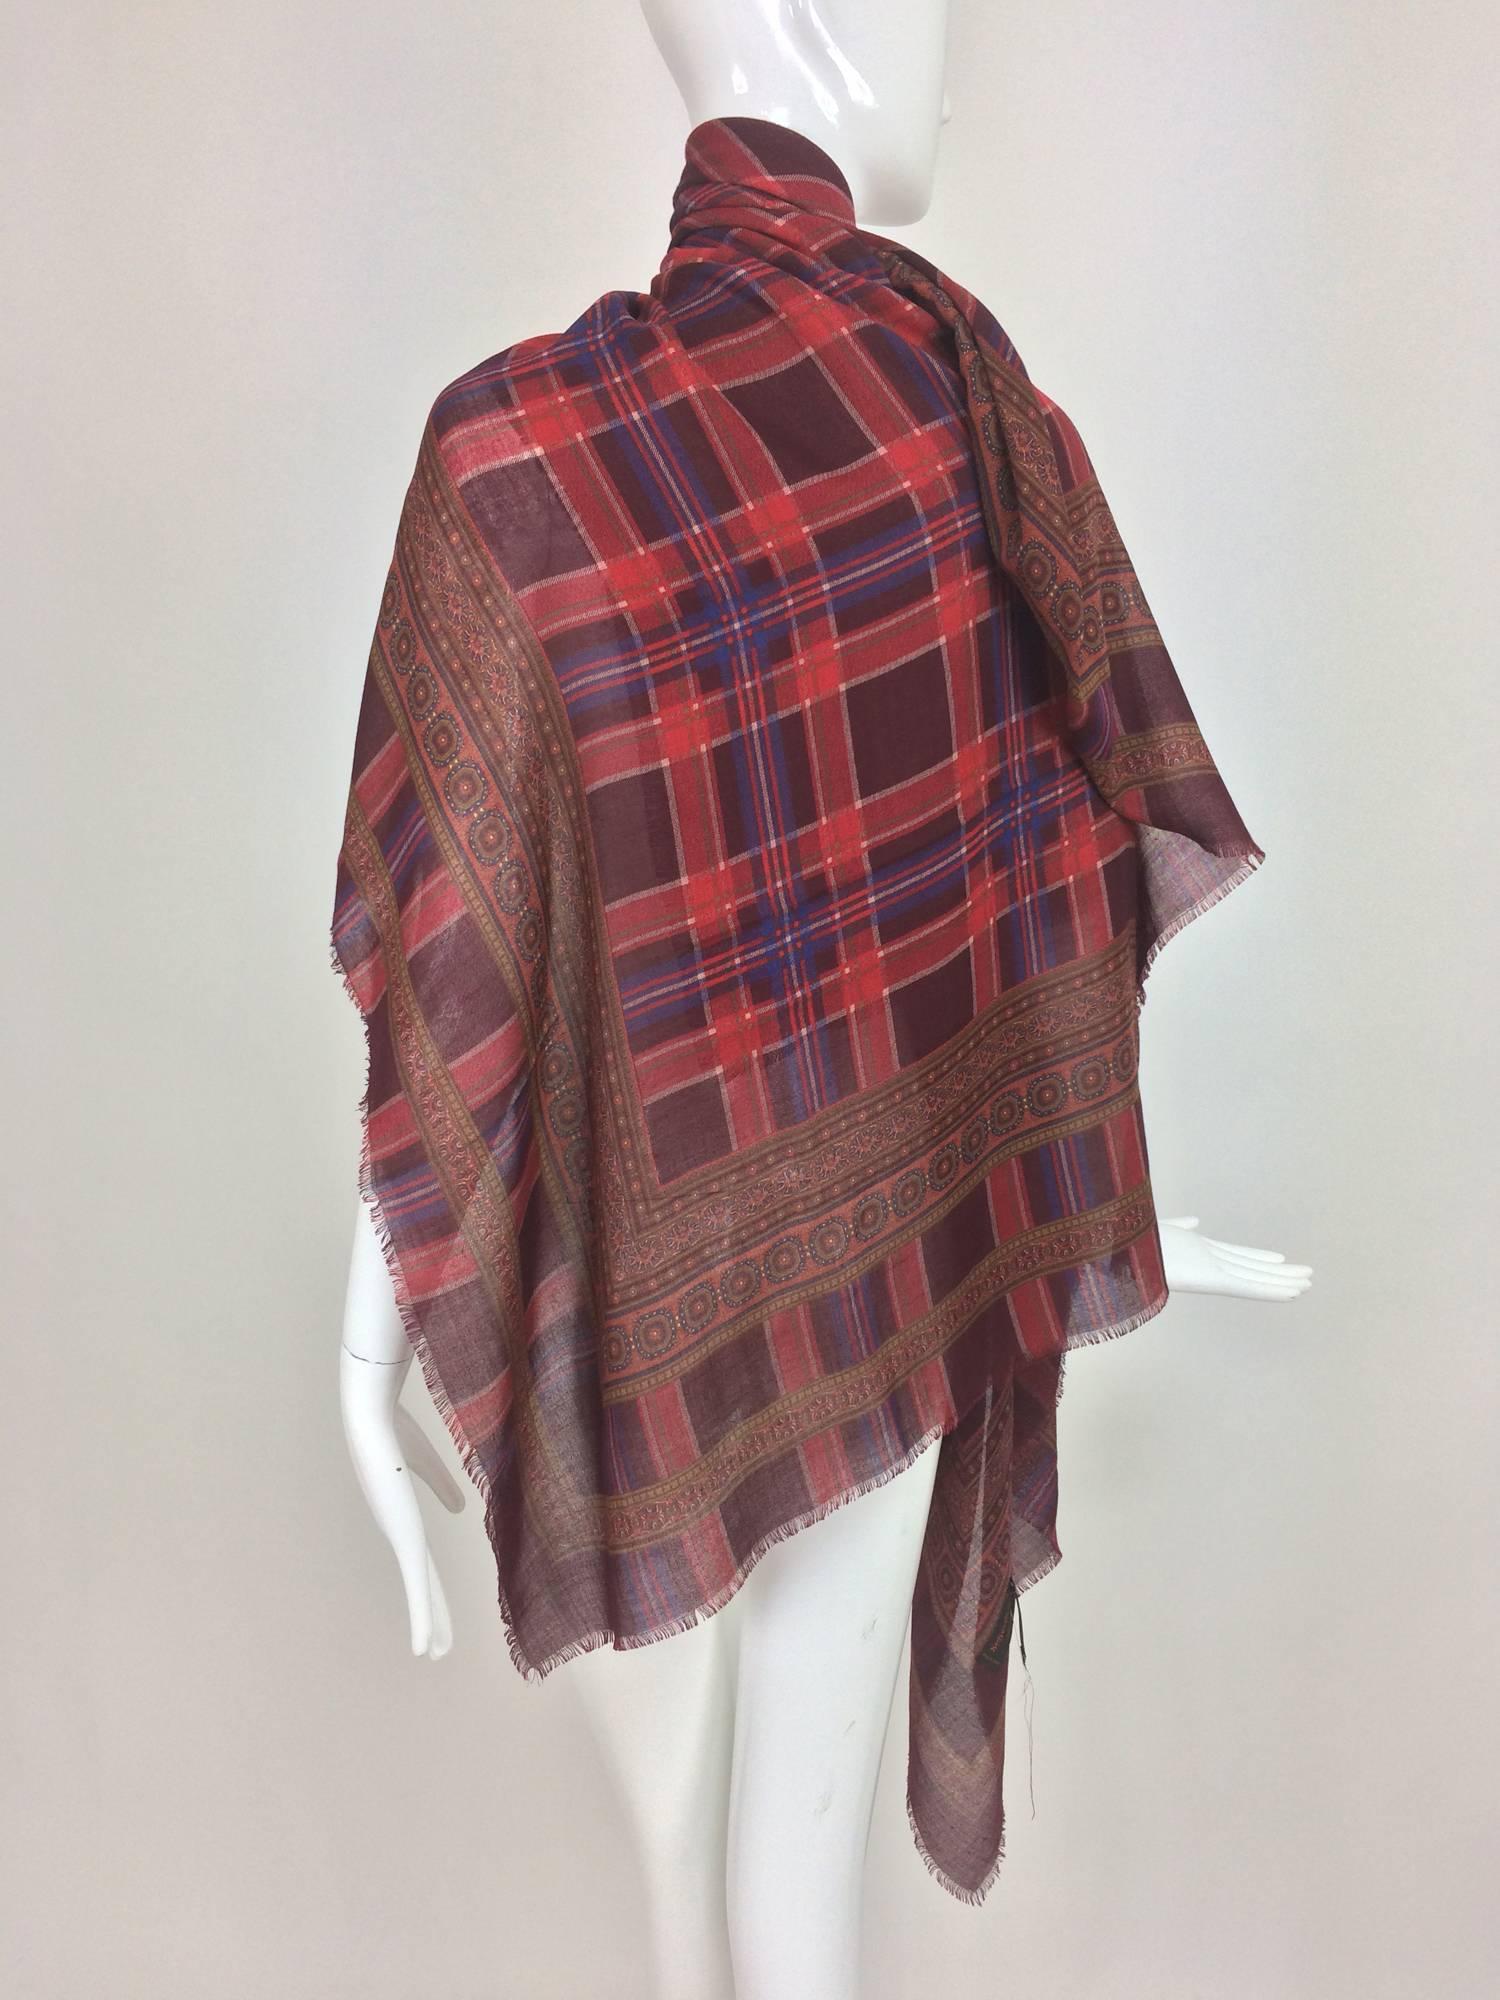 Yves St Laurent cashmere and silk mix plaid and print large shawl scarf 1990s...Beautiful light weight, silky shawl with a narrow self fringe edge on all four sides...

Sale items are final!

Measurements are:
55" x 55"